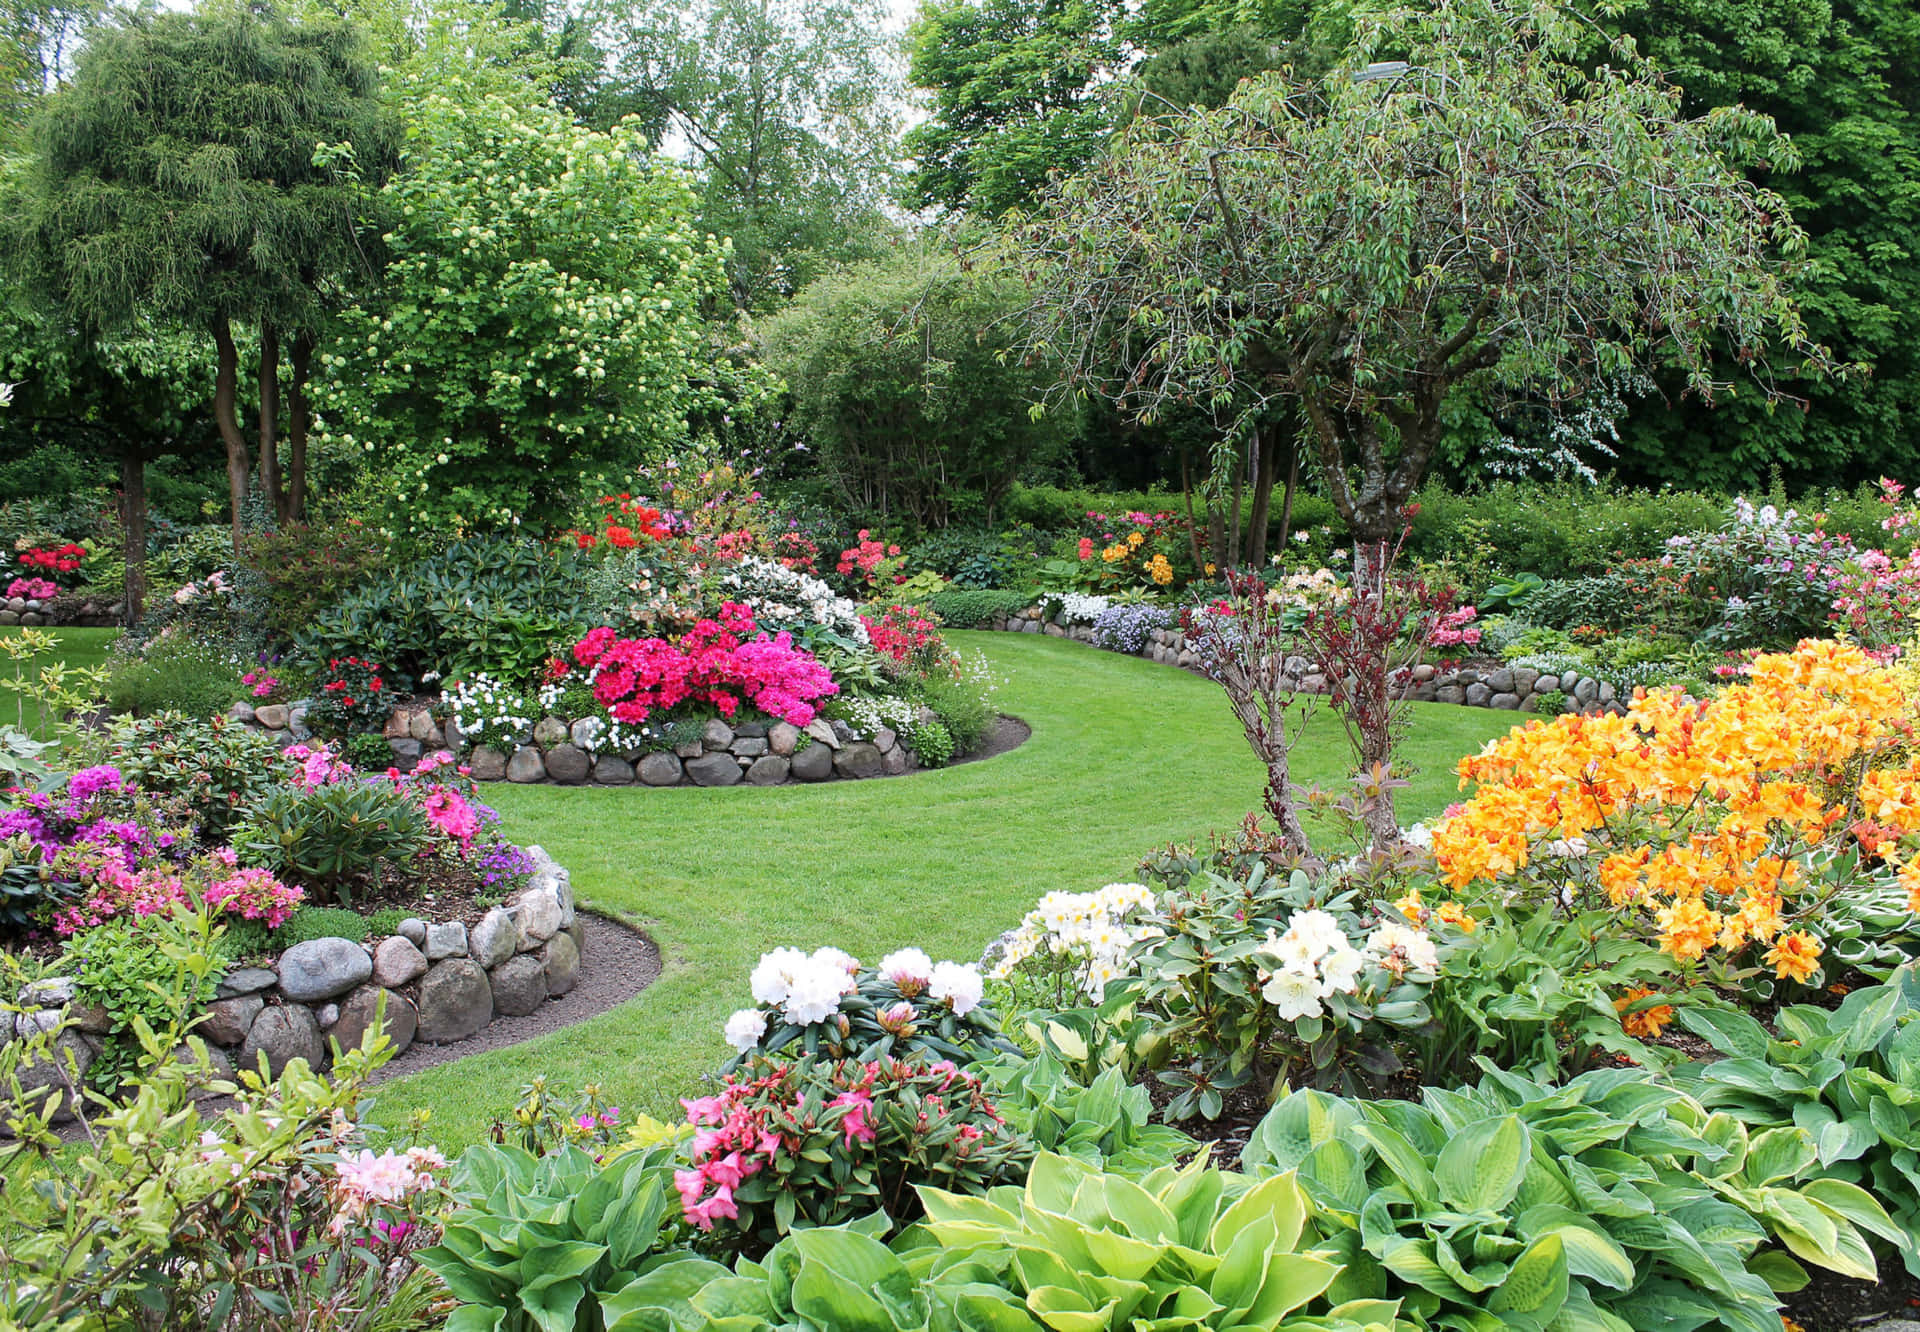 a garden with many colorful flowers and plants